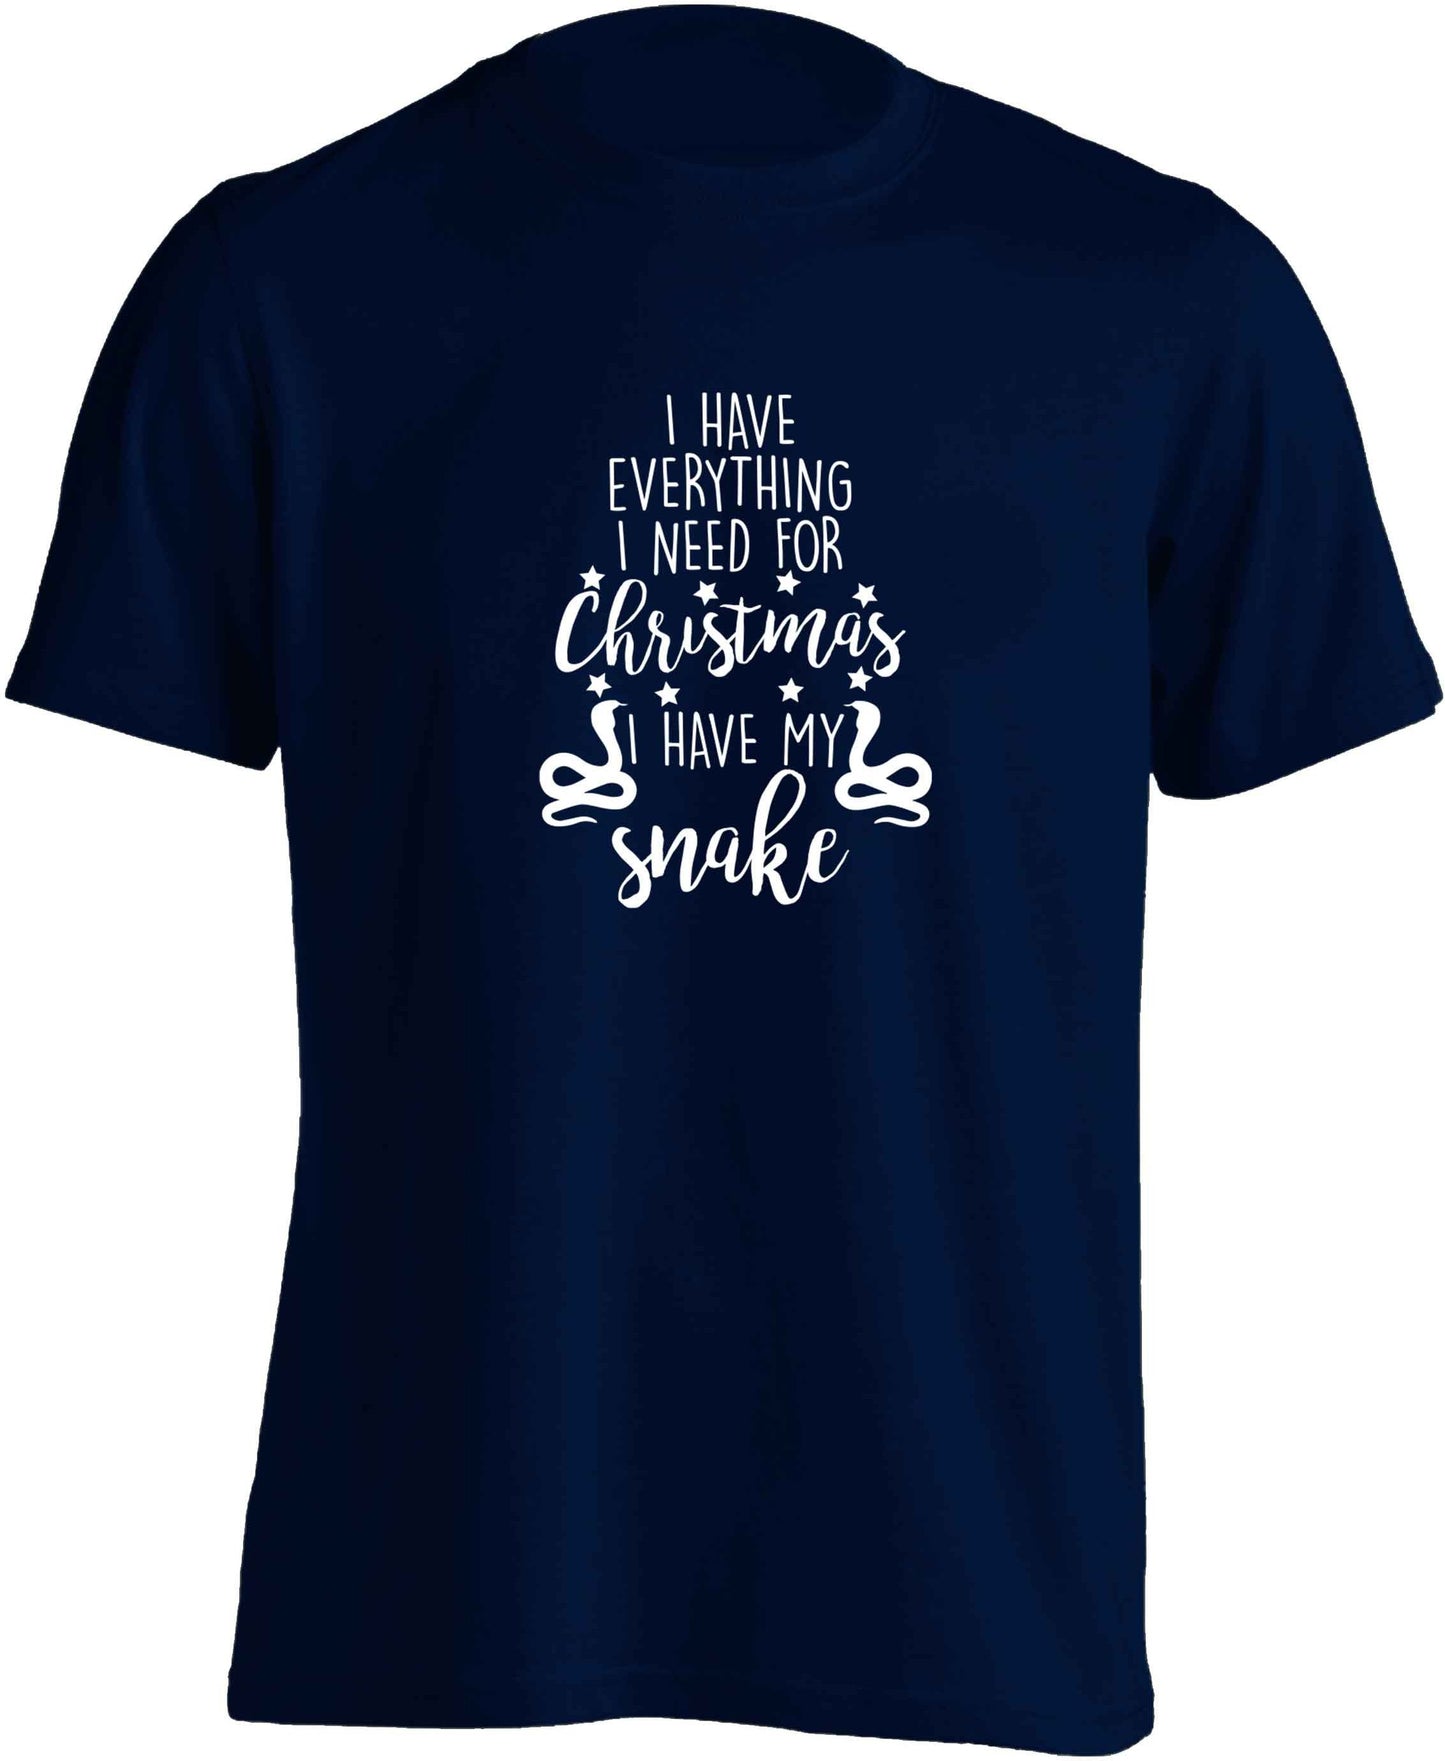 I have everything I need for Christmas I have my snake adults unisex navy Tshirt 2XL